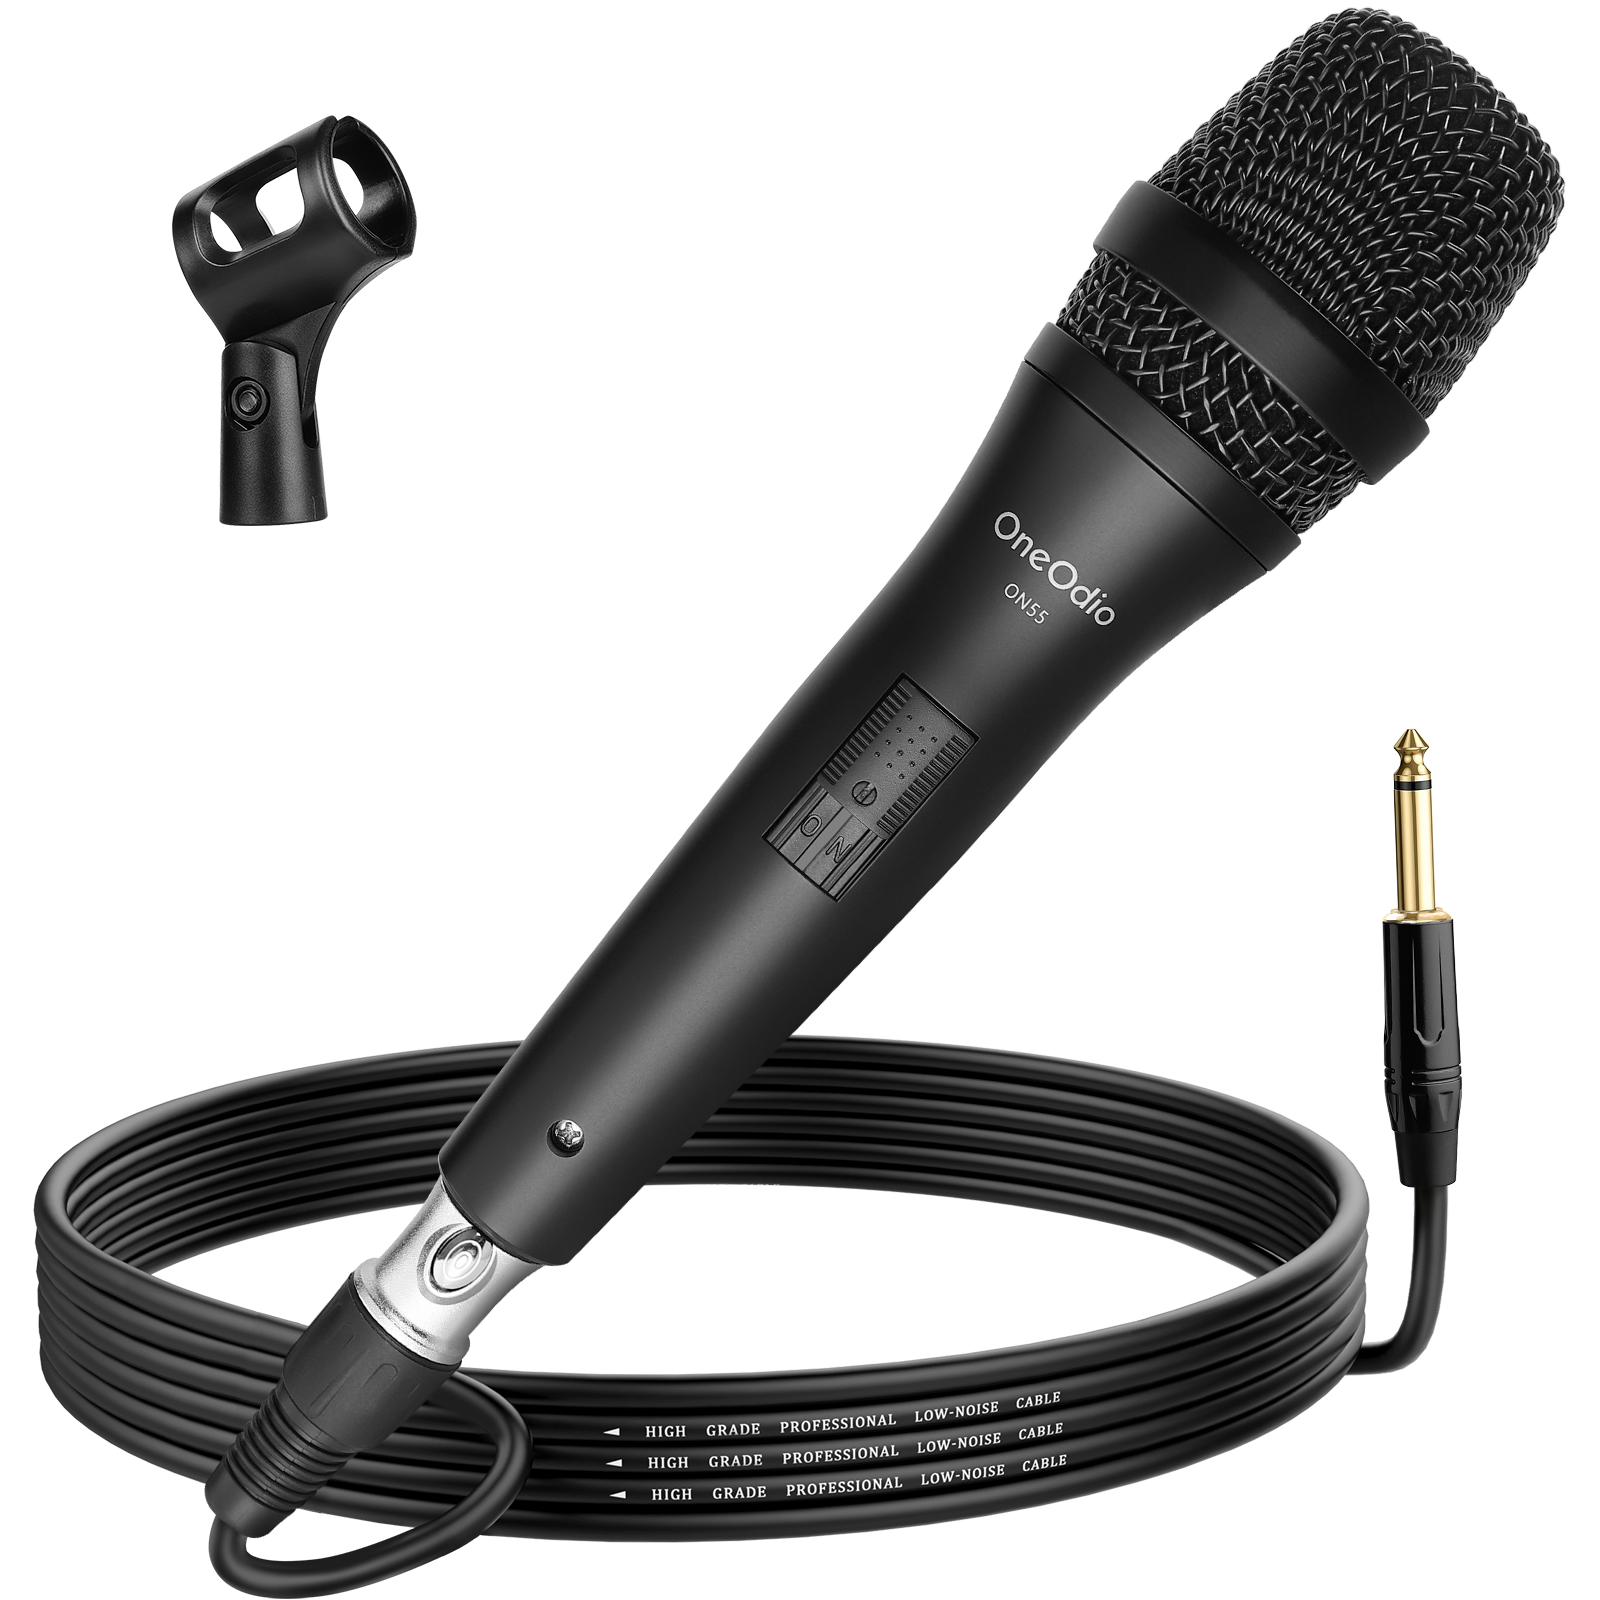 6974028140793 OneOdio ON55, Microphone, black - Mikrofon TV & HIFI,Lyd,Diverse lyd 21100001630 ON55